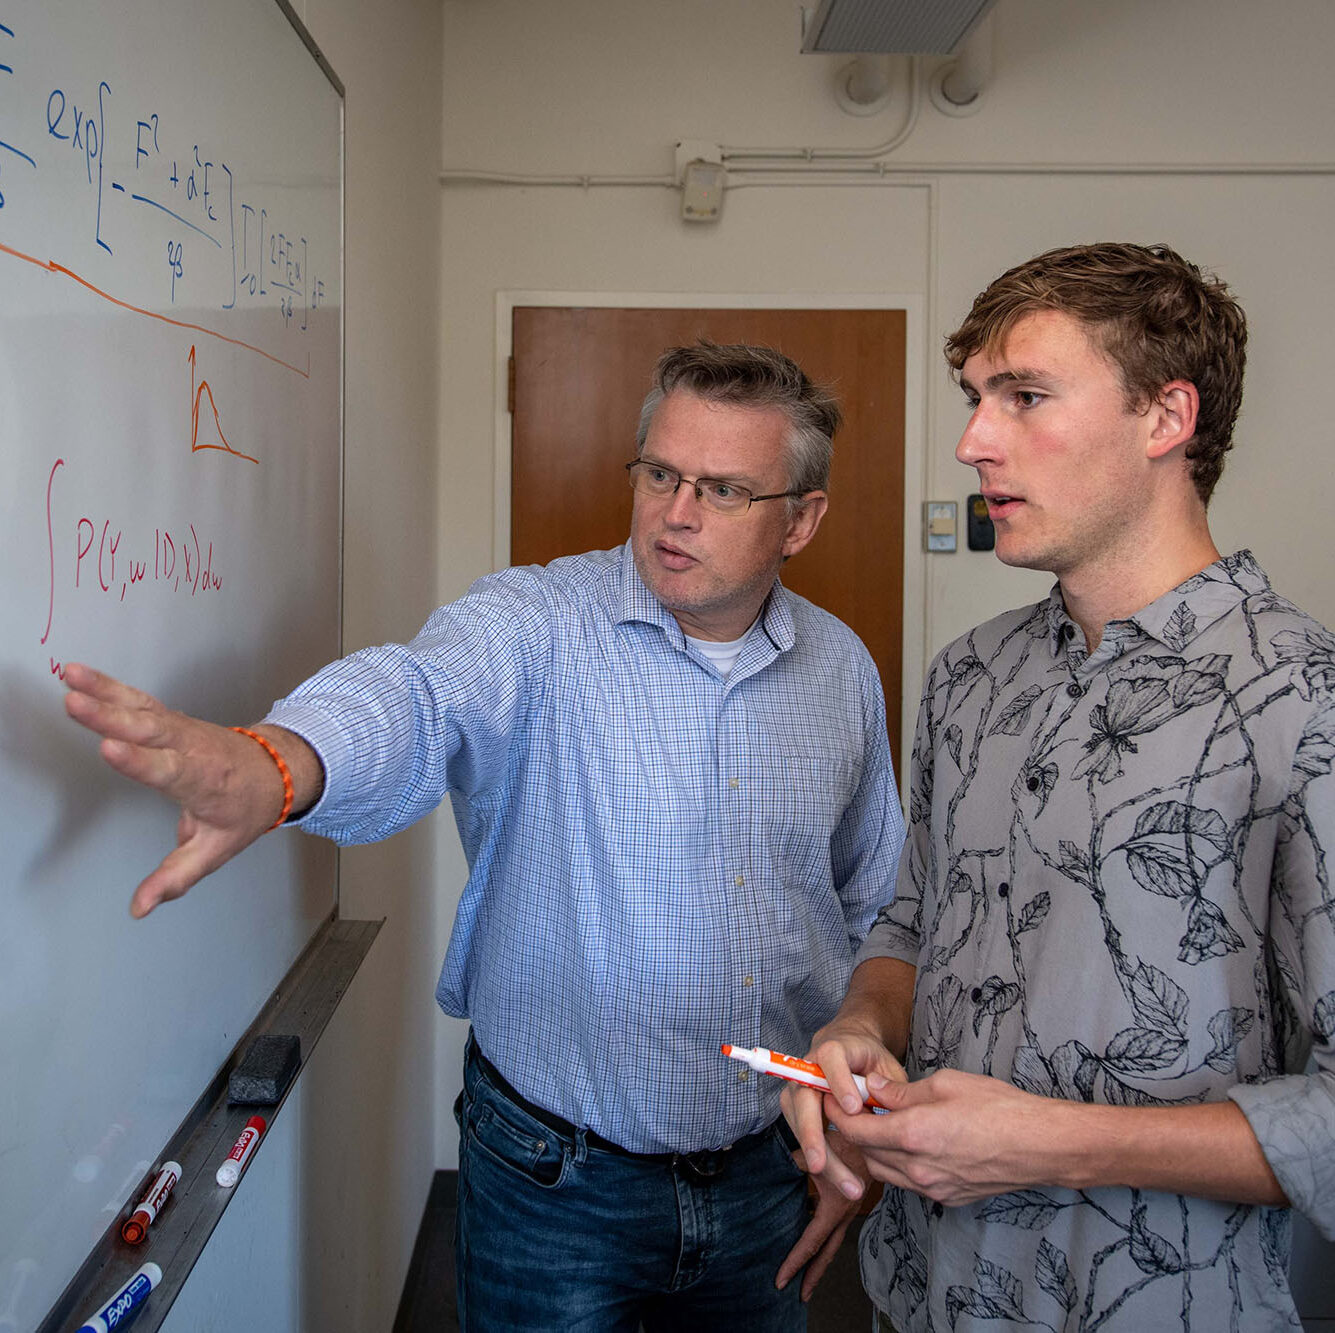 Two people staring and pointing at a whiteboard with scientific equations.